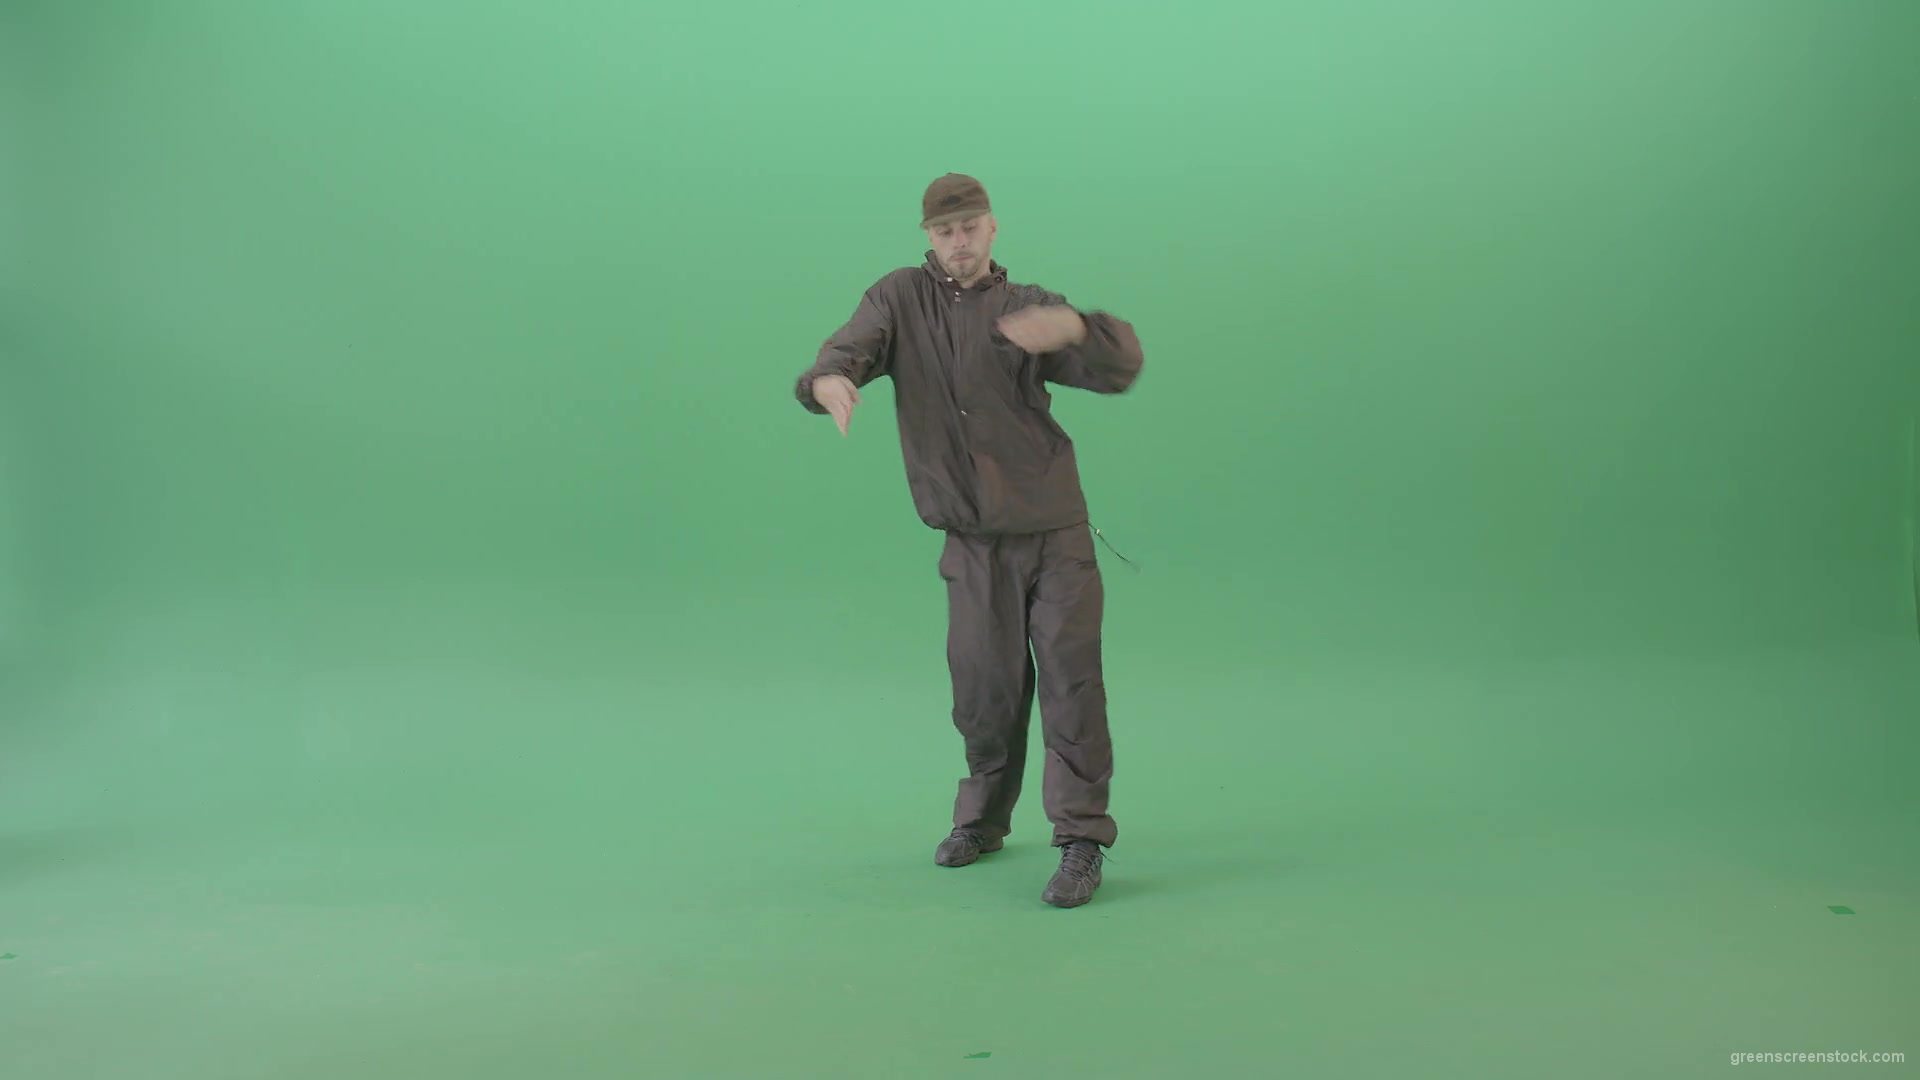 Top-Break-dance-by-electric-boogie-hip-hop-dancer-isolated-on-green-screen-4K-Video-Footage-1920_004 Green Screen Stock